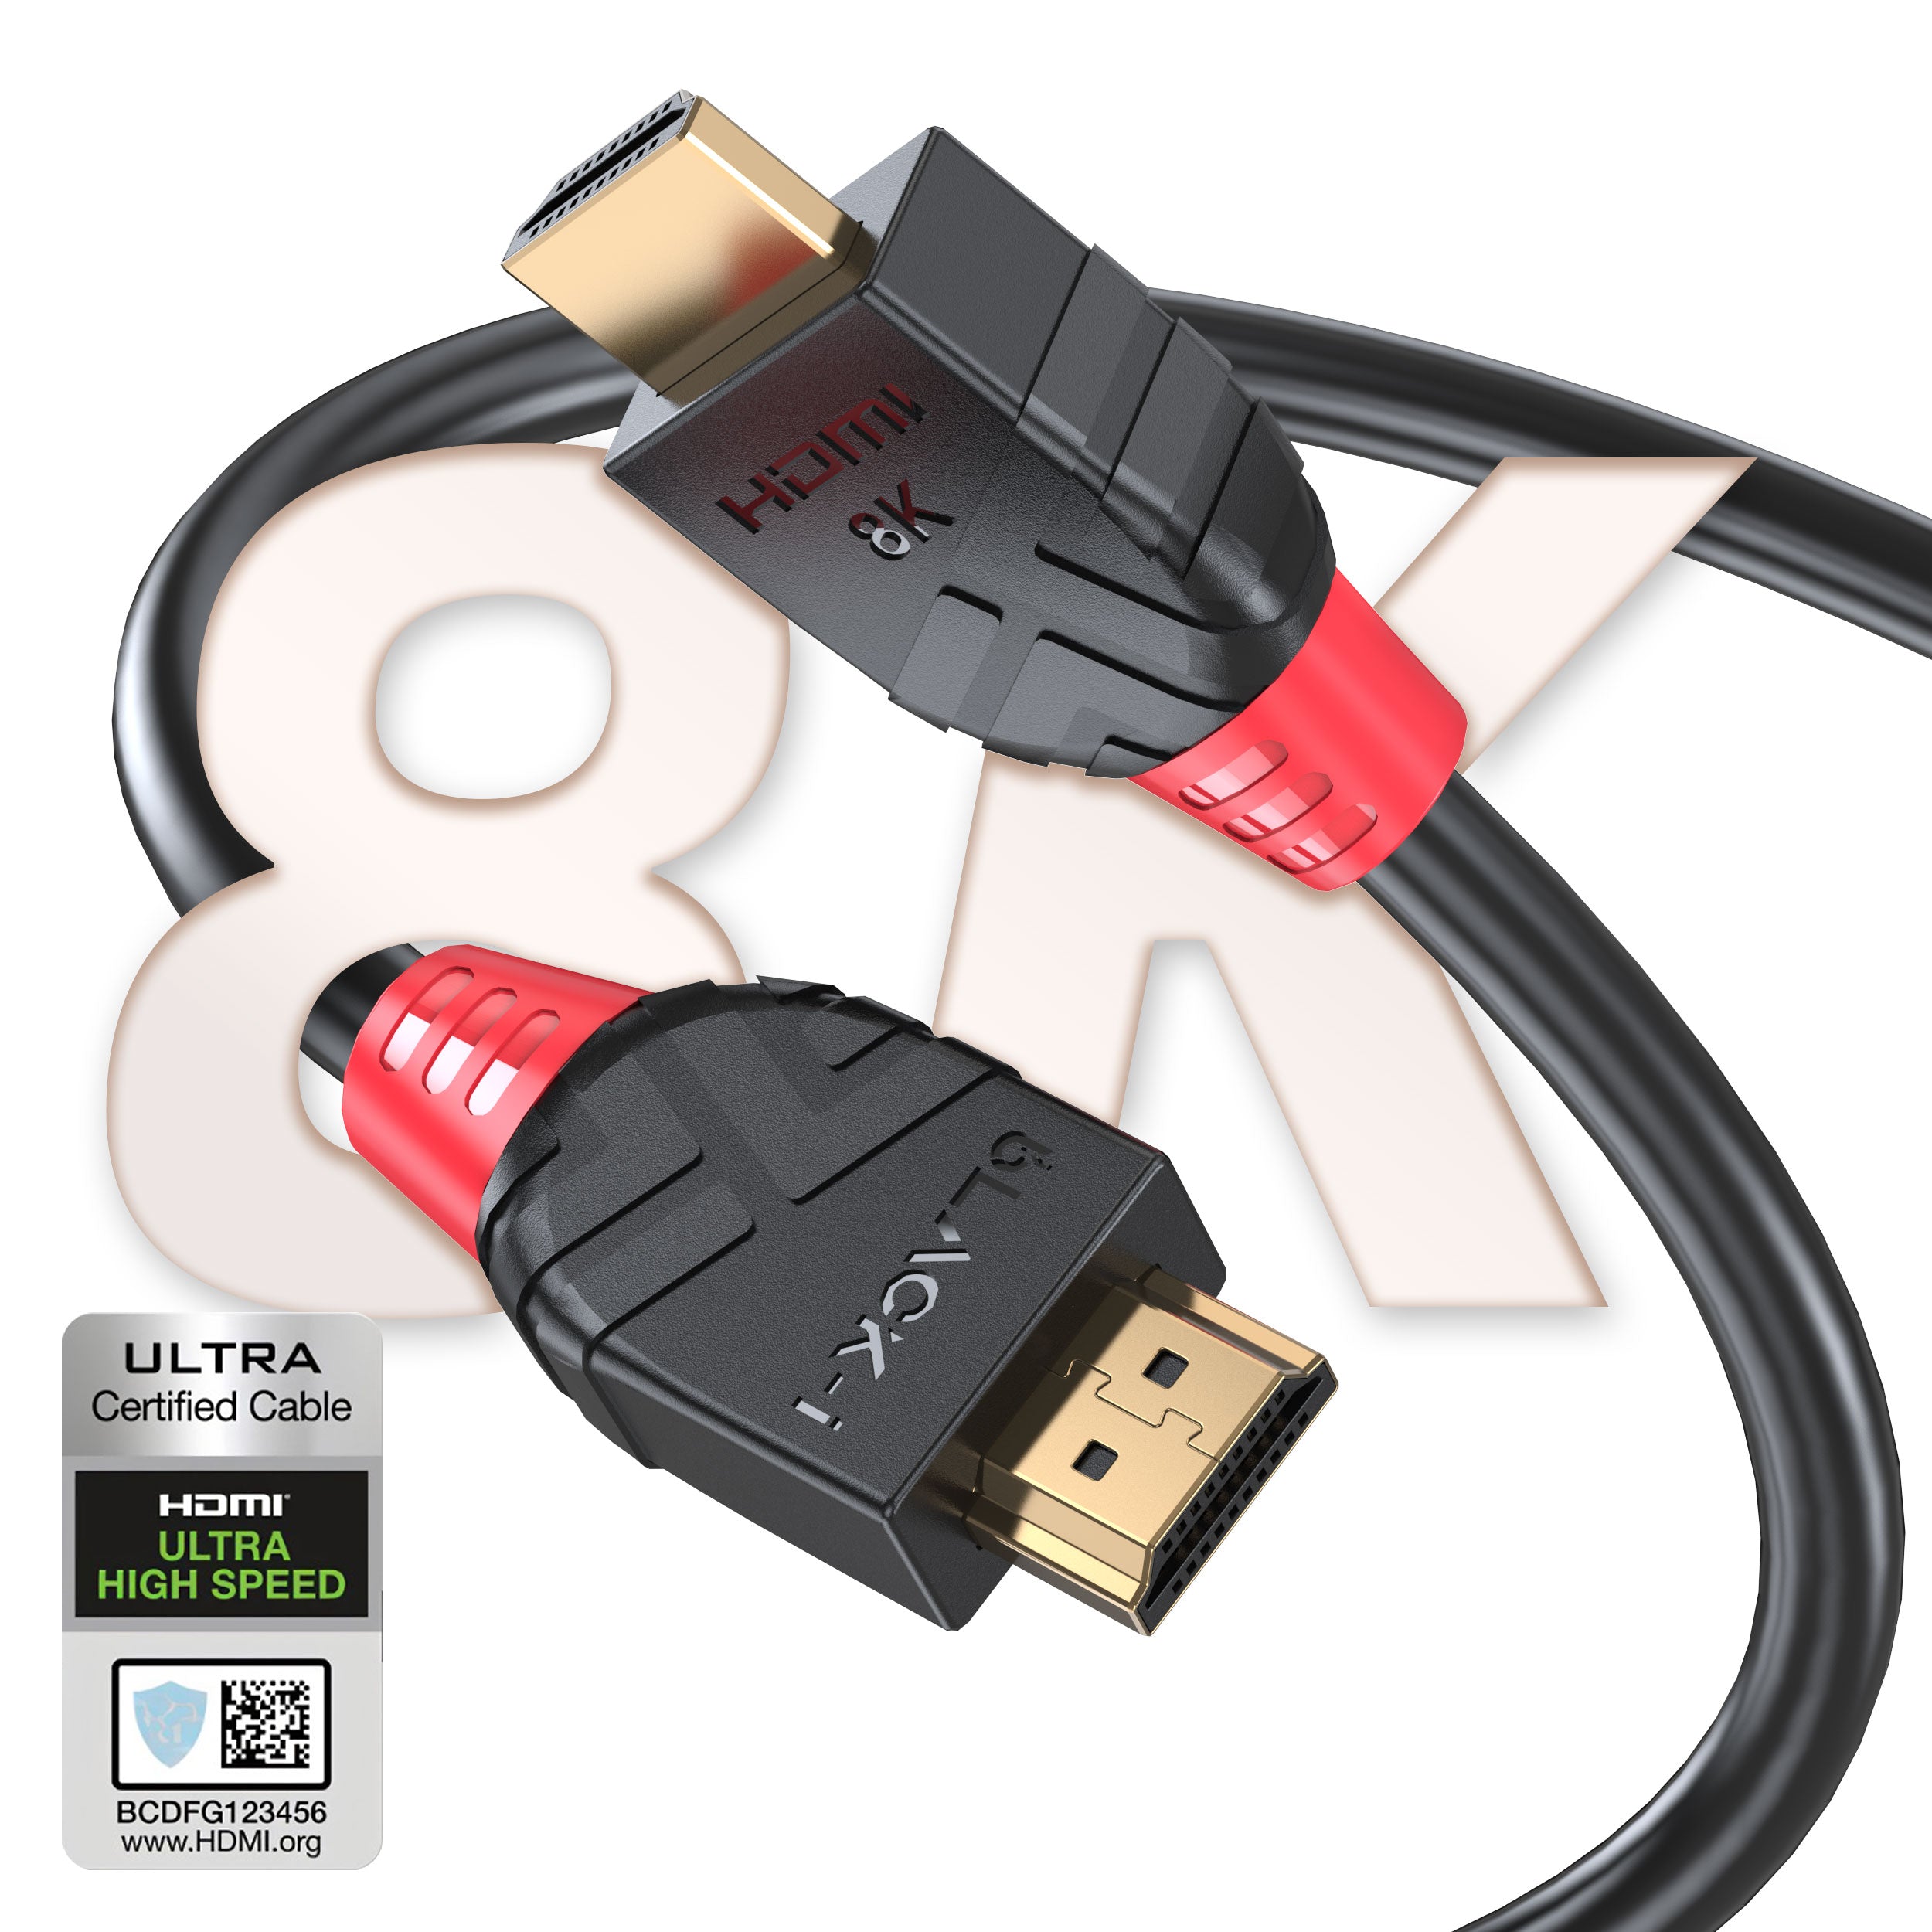 BLACK-I Ultra High-Speed HDMI 2.1 8K Cable (BI-HD-8K) – Elevate Your Visual Experience with 8K@60Hz, 4K@120Hz, HDR, VRR, eARC, and 48Gbps of Unparalleled Performance